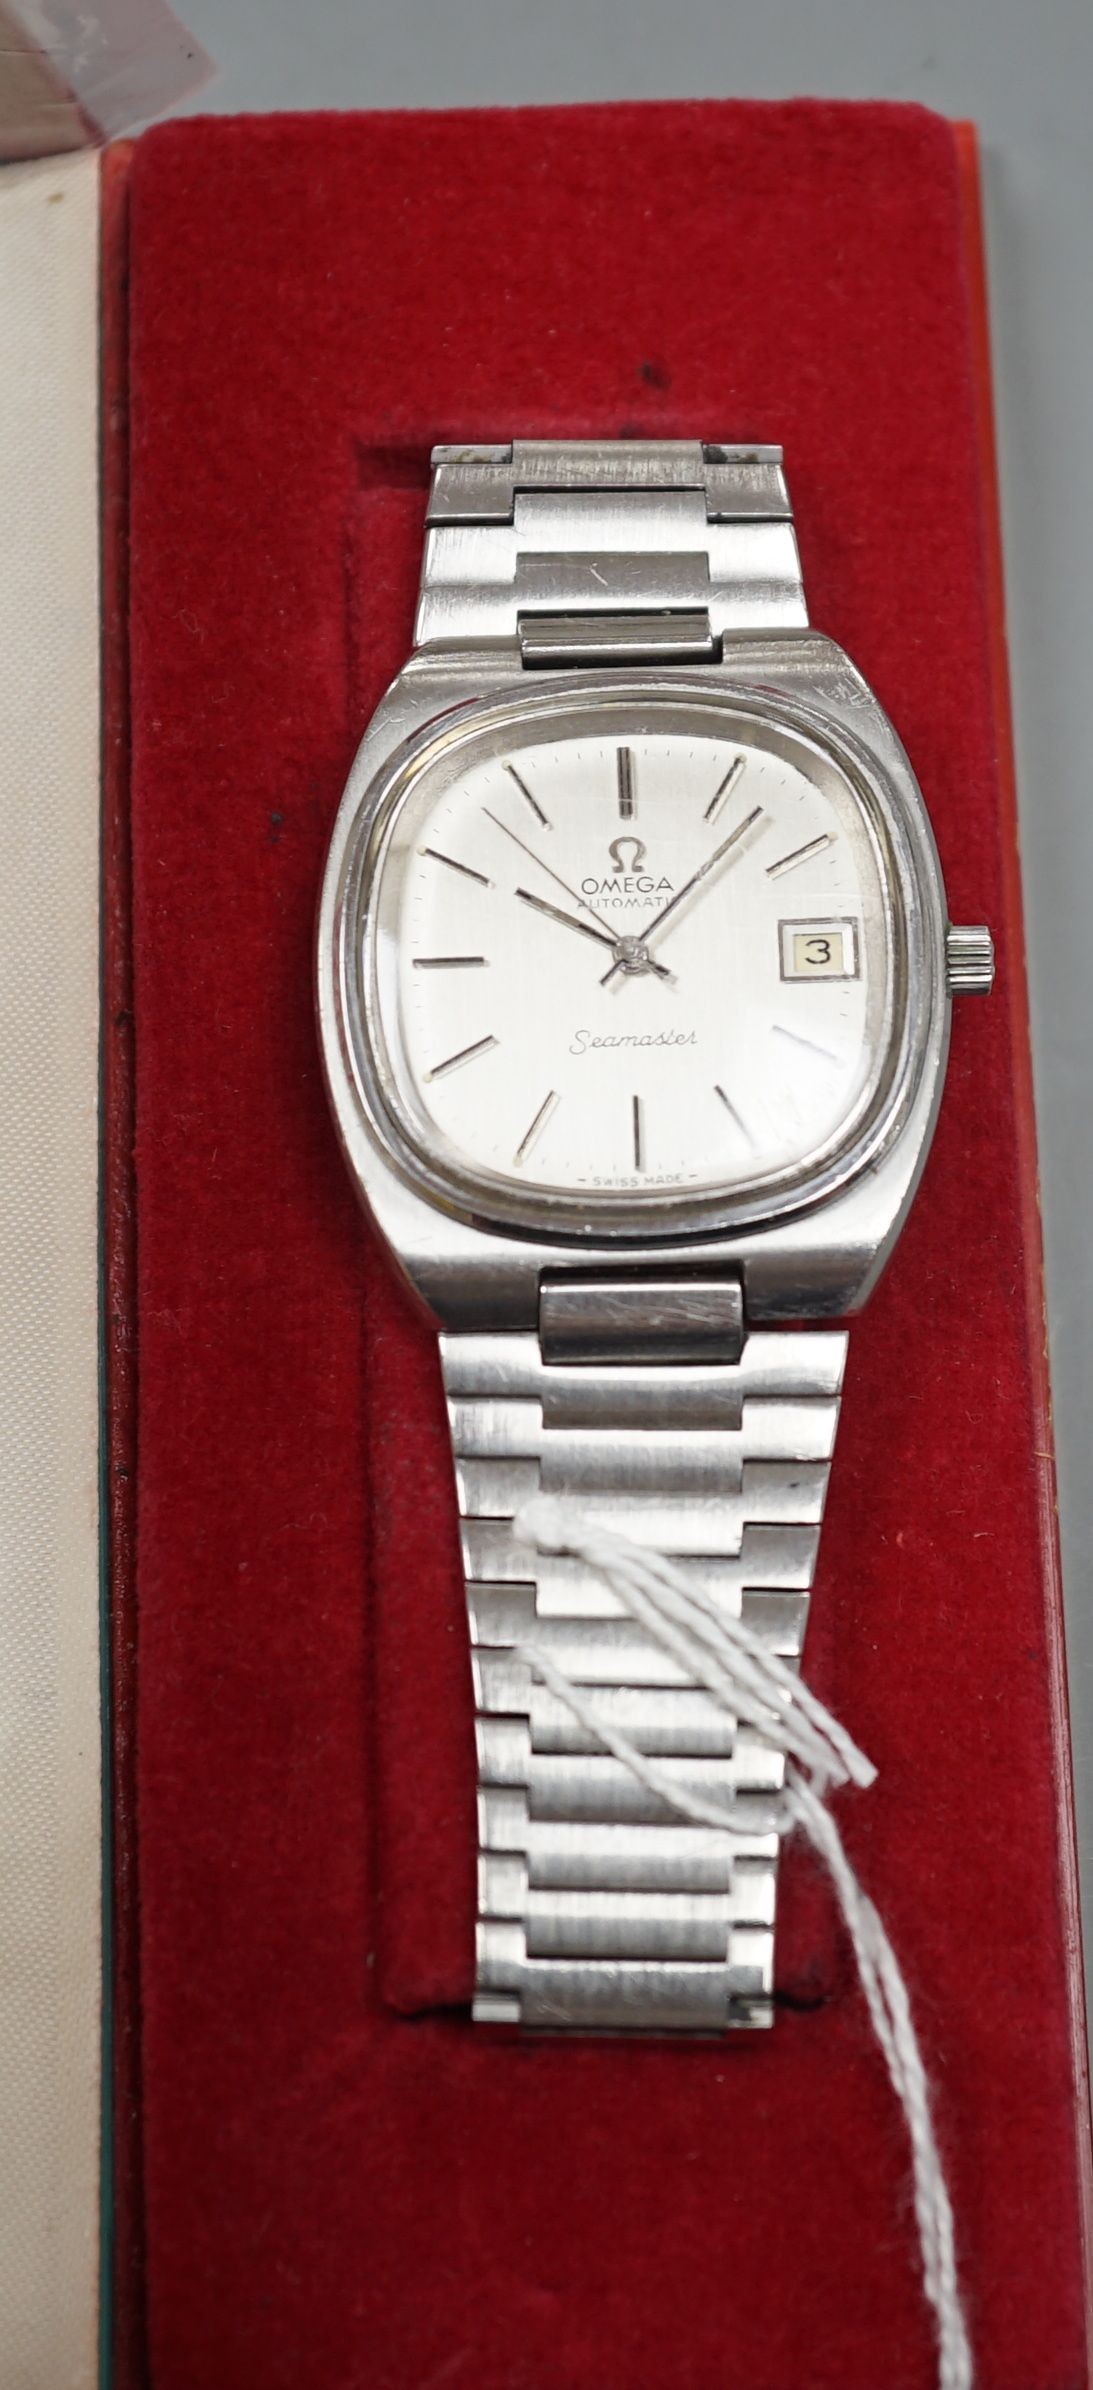 A gentleman's 1970's stainless steel Omega Seamaster automatic wrist watch, on a stainless steel Omega bracelet, with box, spare link, spare glass and original guarantee, case diameter 36mm.